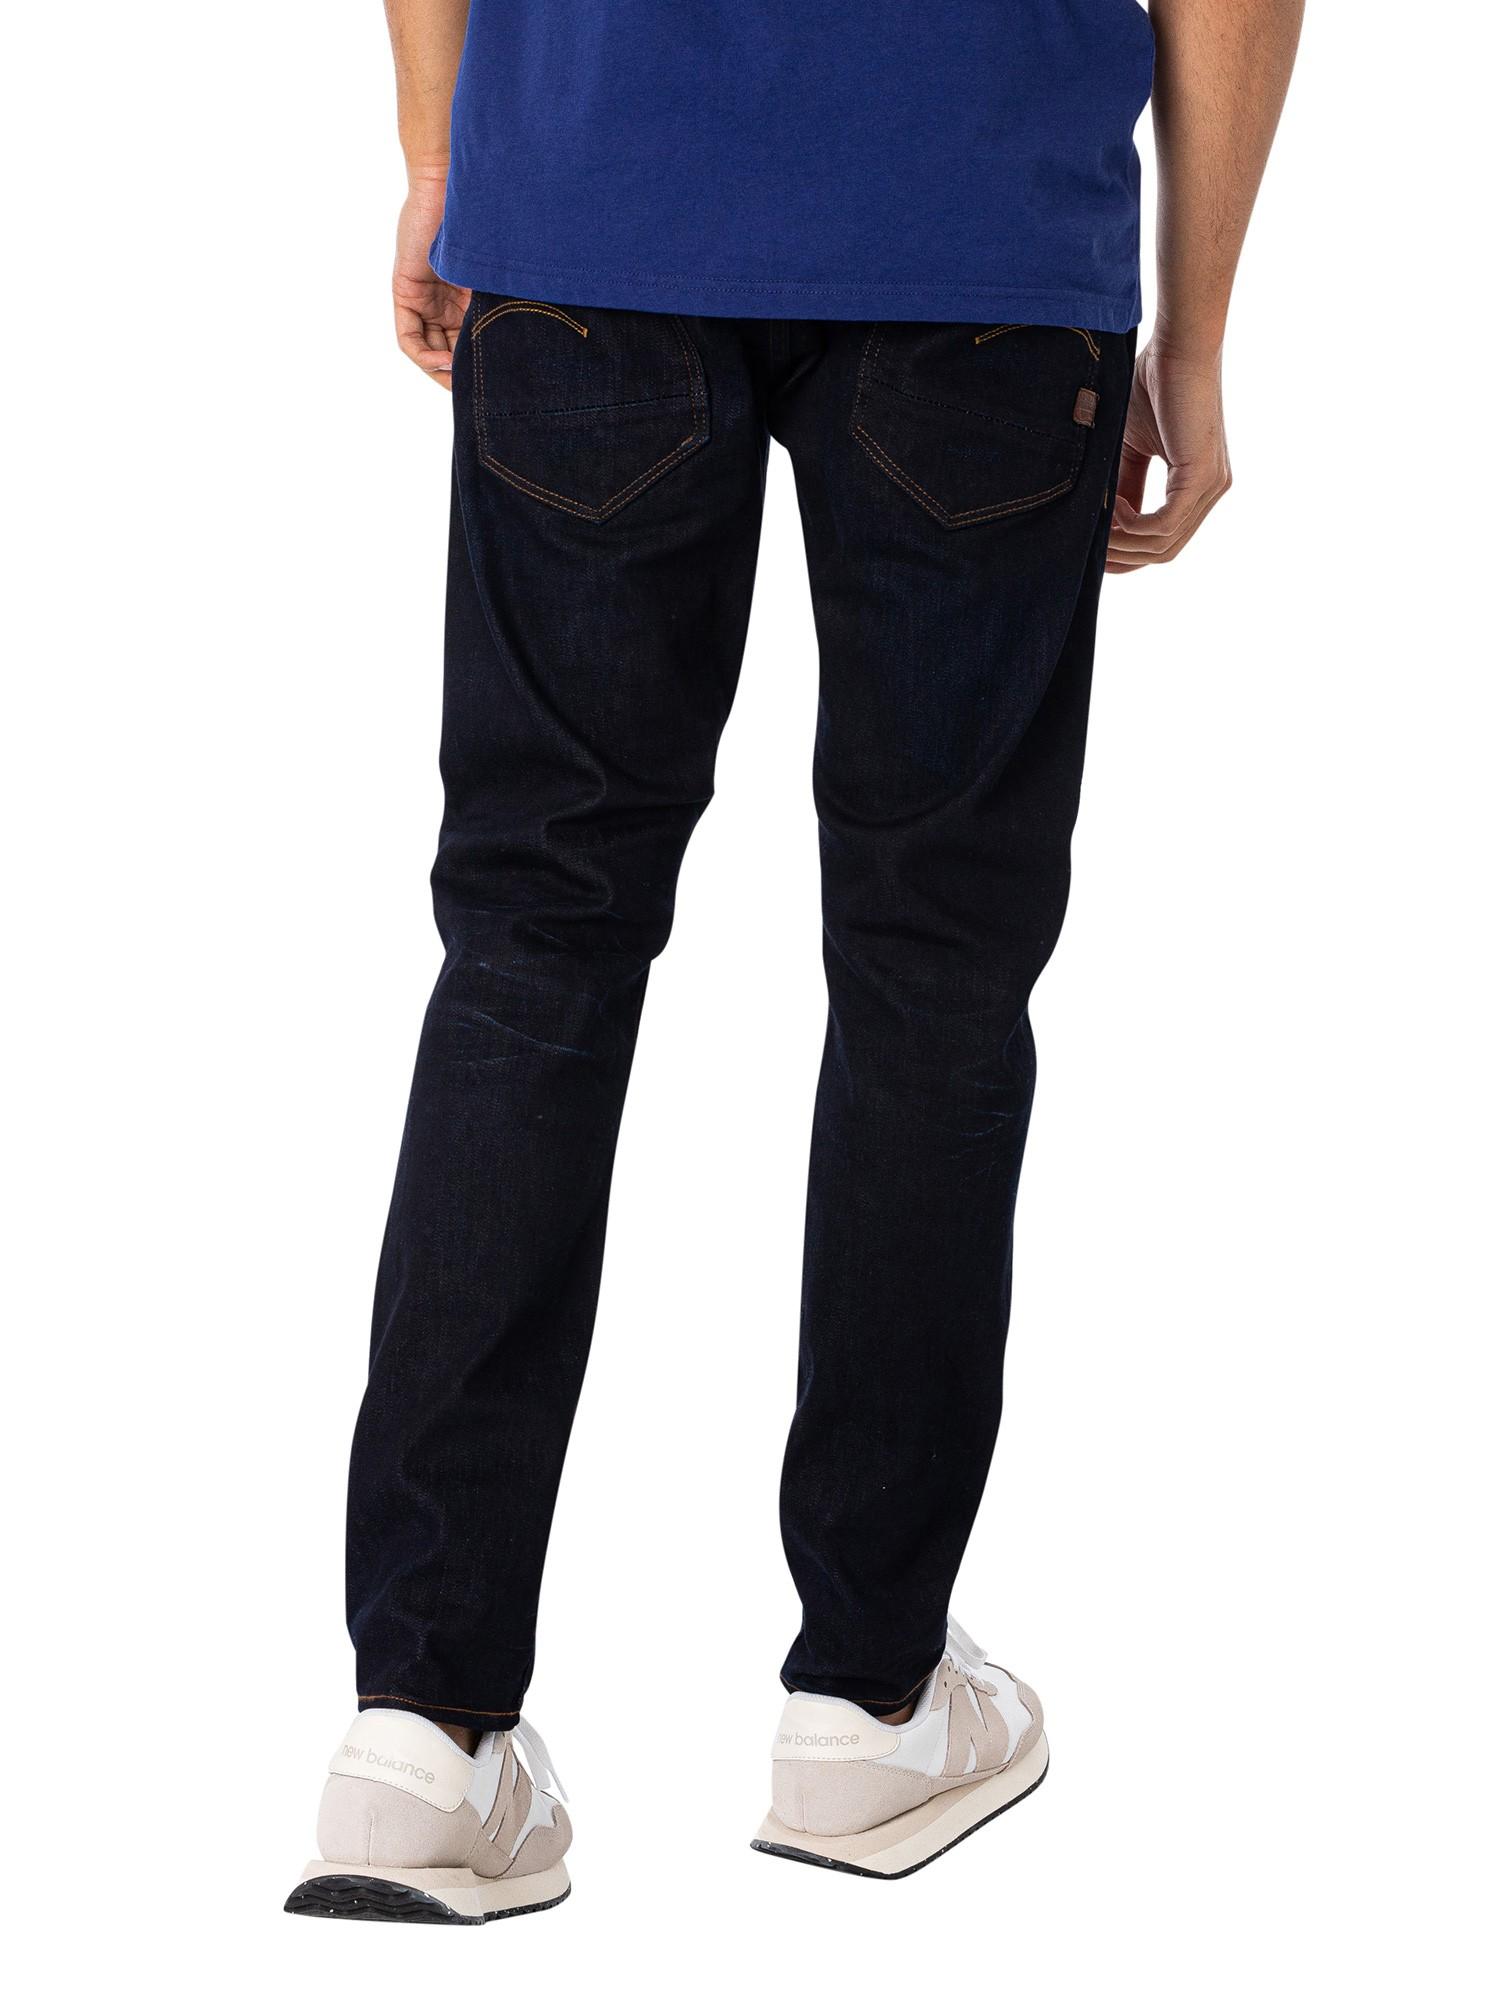 RAW D-staq 5 Slim Fit Jeans in Blue for Men Lyst